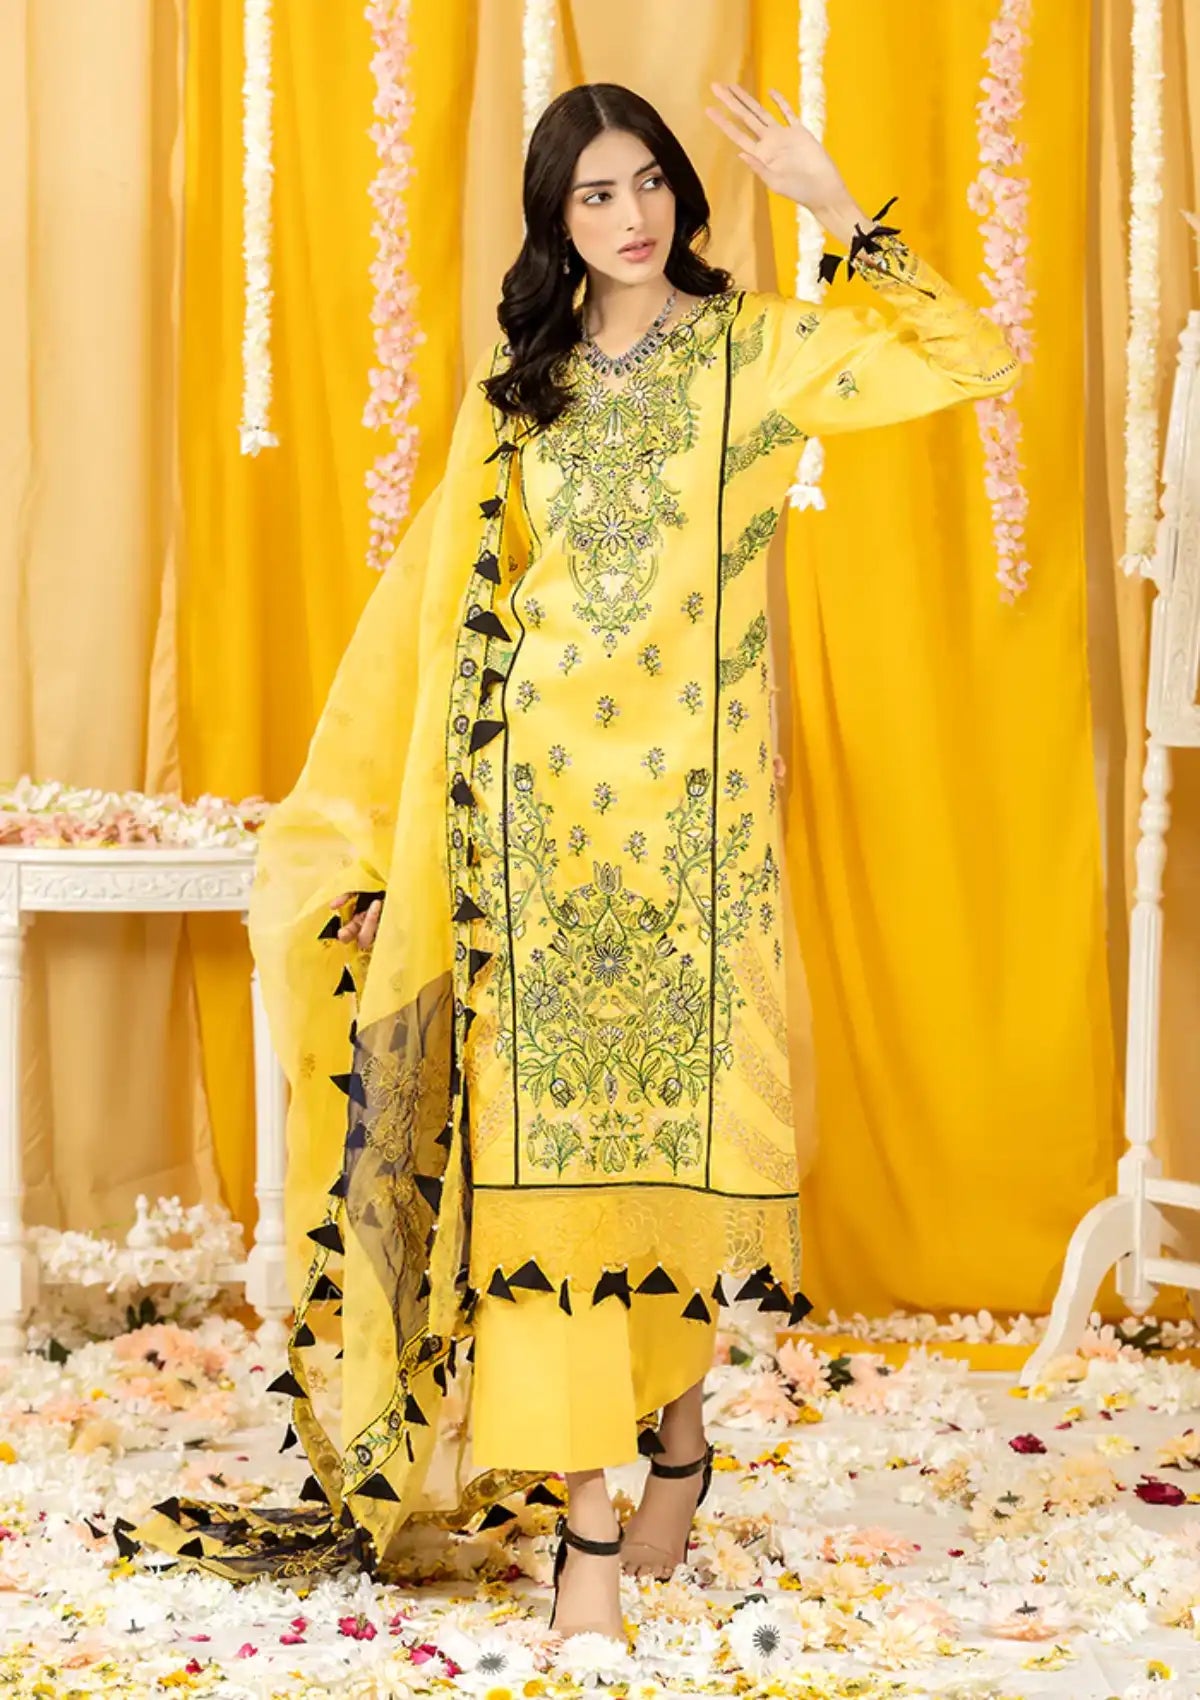 Ghazal by Humdum Lawn'23 GZ-06 is available at Mohsin Saeed Fabrics. ✓ shop all the top women clothing brands in pakistan ✓ Best Price and Offers ✓ Free Shipping ✓ Cash on Delivery ✓ formal & Wedding Collections 